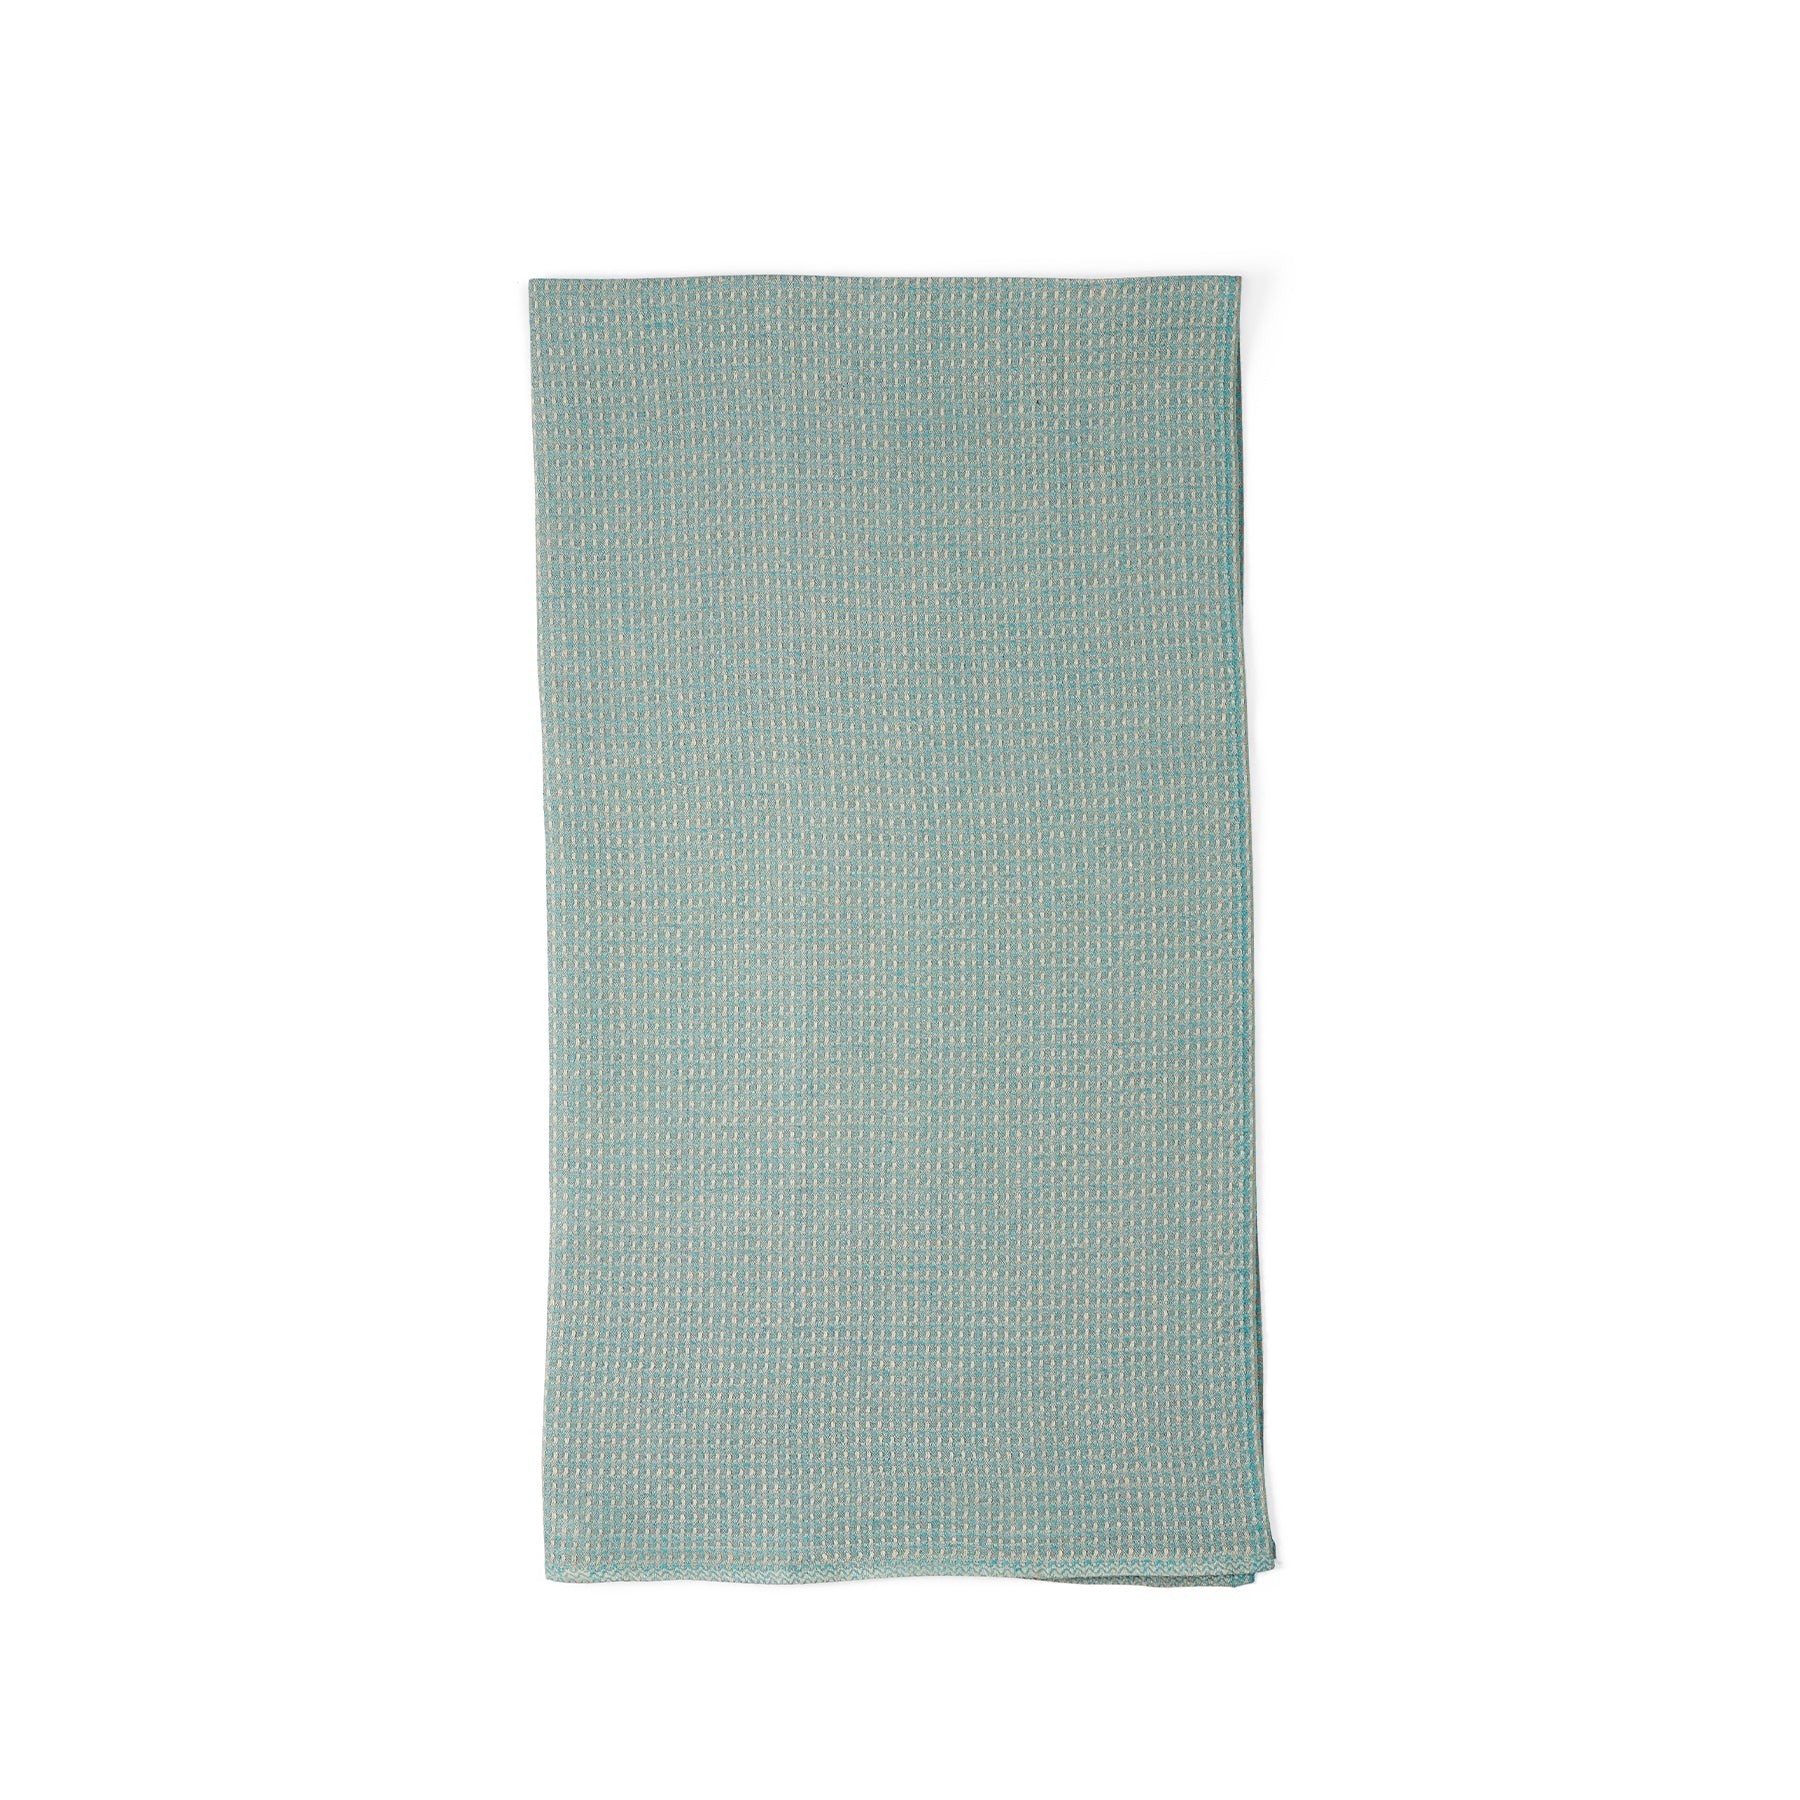 Bubbel Bath Towel in Turquoise Zoom Image 1